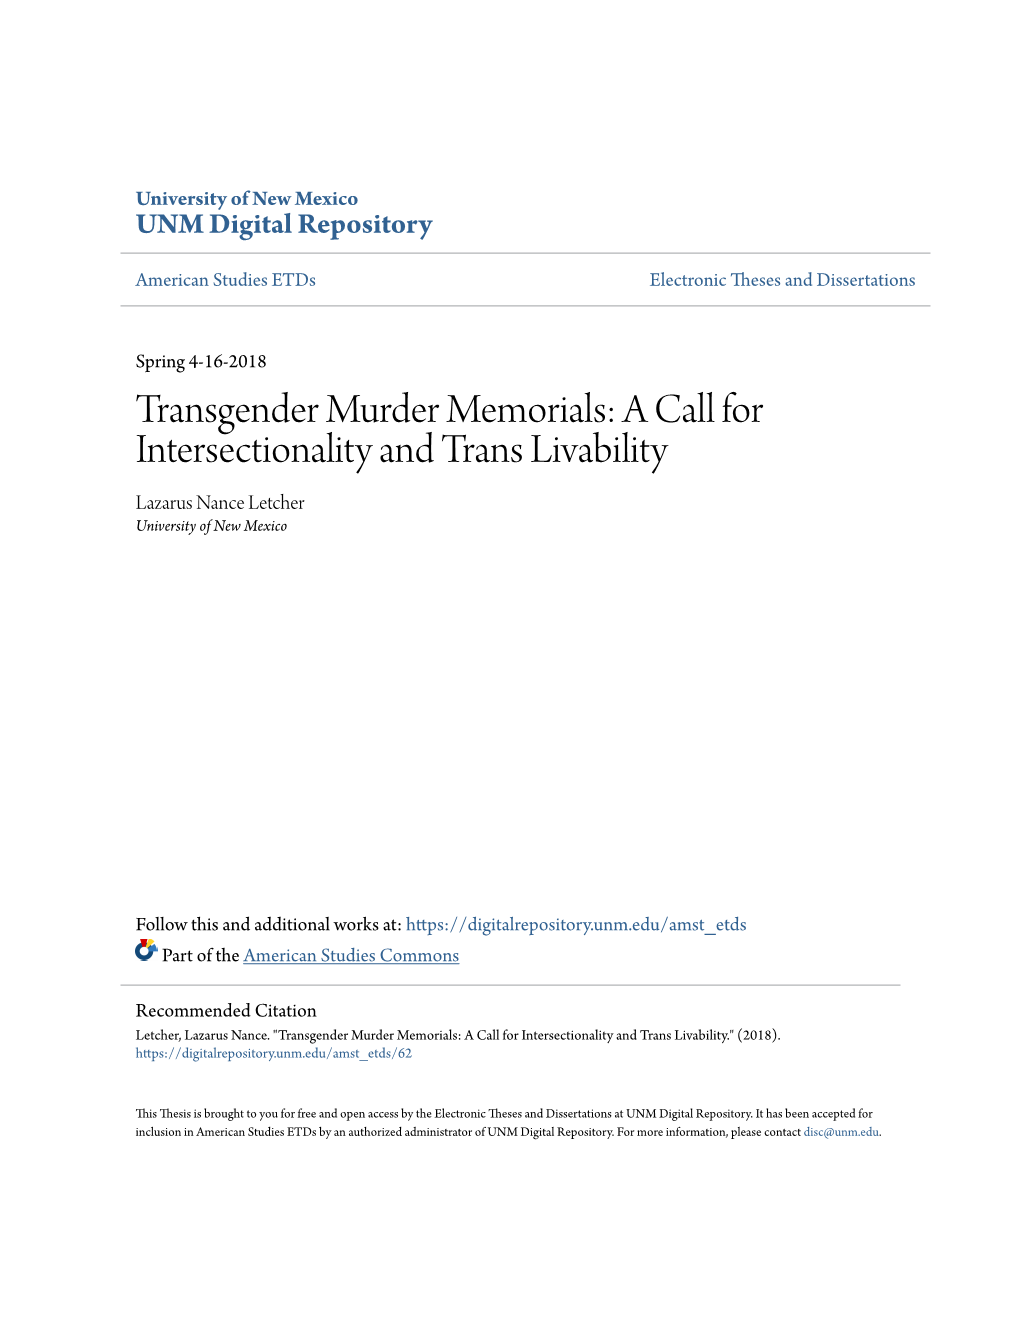 Transgender Murder Memorials: a Call for Intersectionality and Trans Livability Lazarus Nance Letcher University of New Mexico